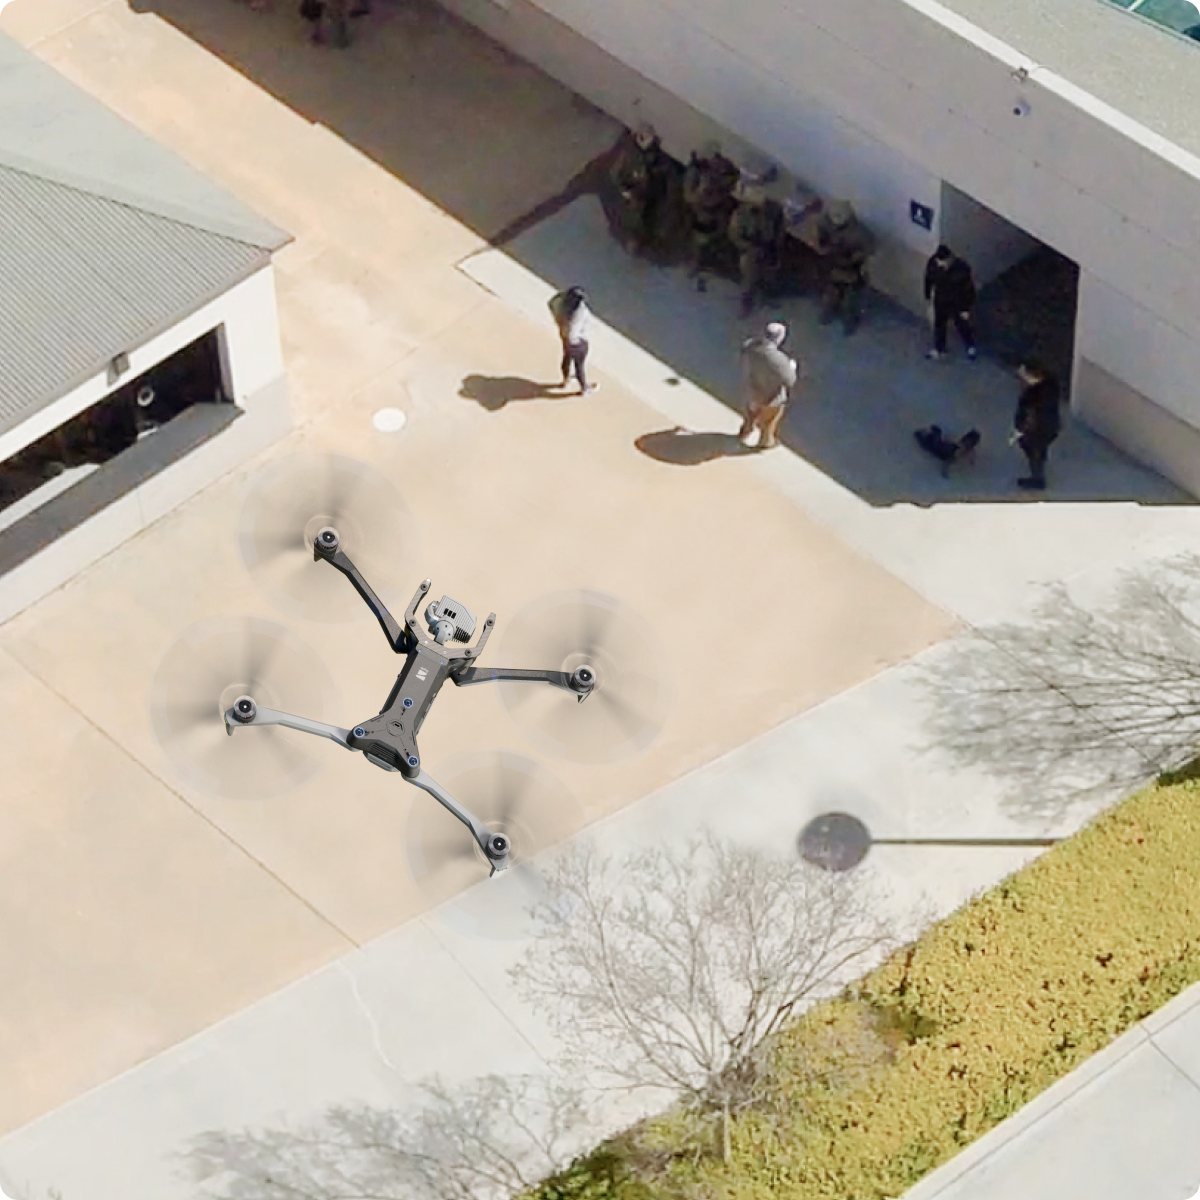 Skydio X10 Drone being used by police for a mission